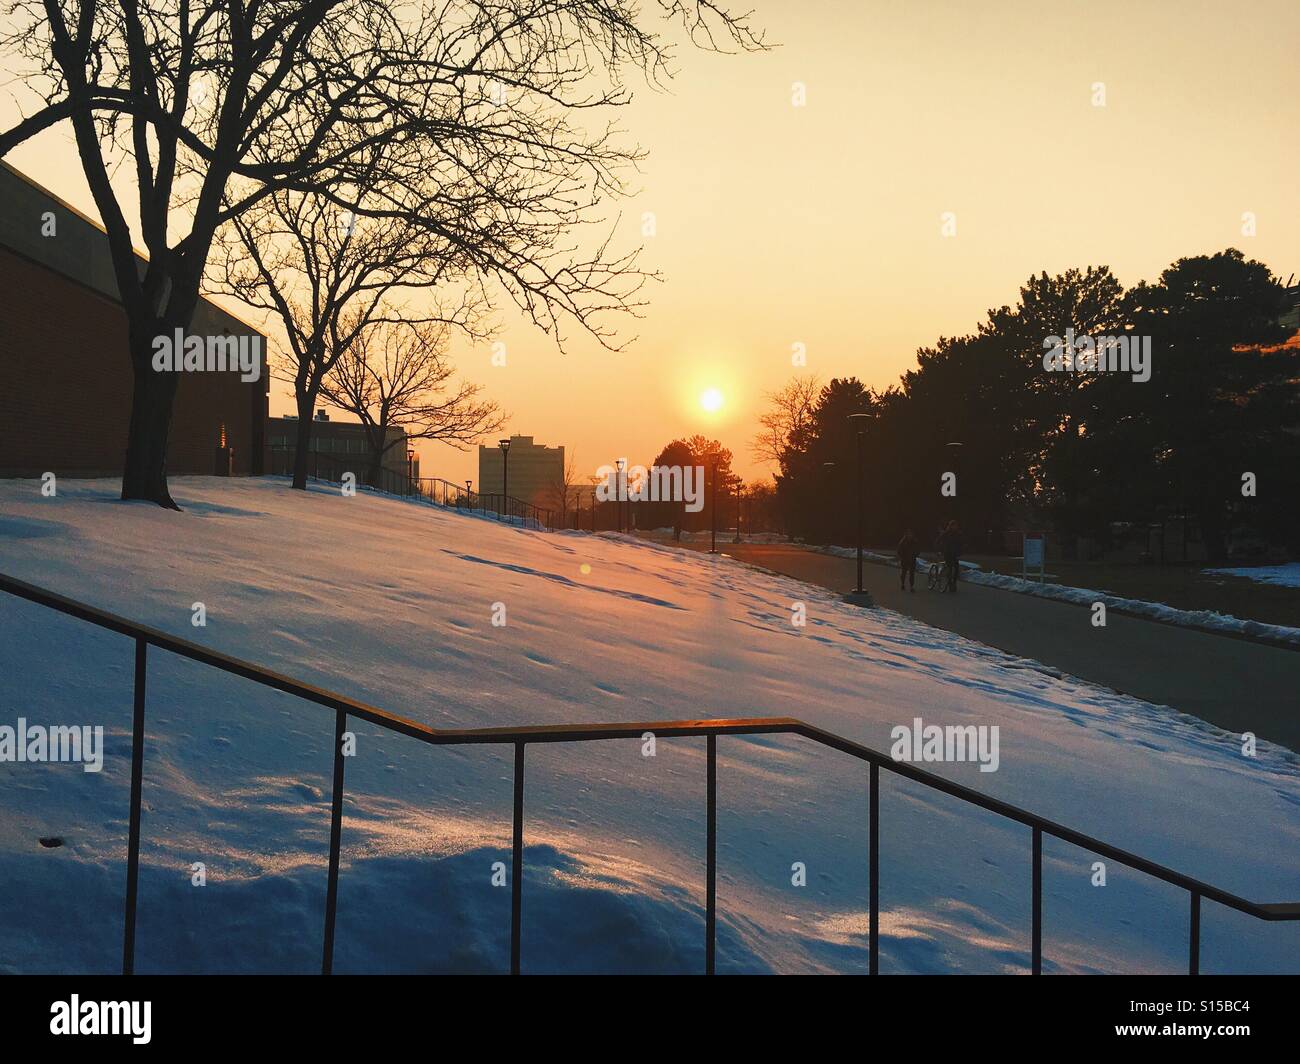 The sun sets over a snowy college campus. Stock Photo